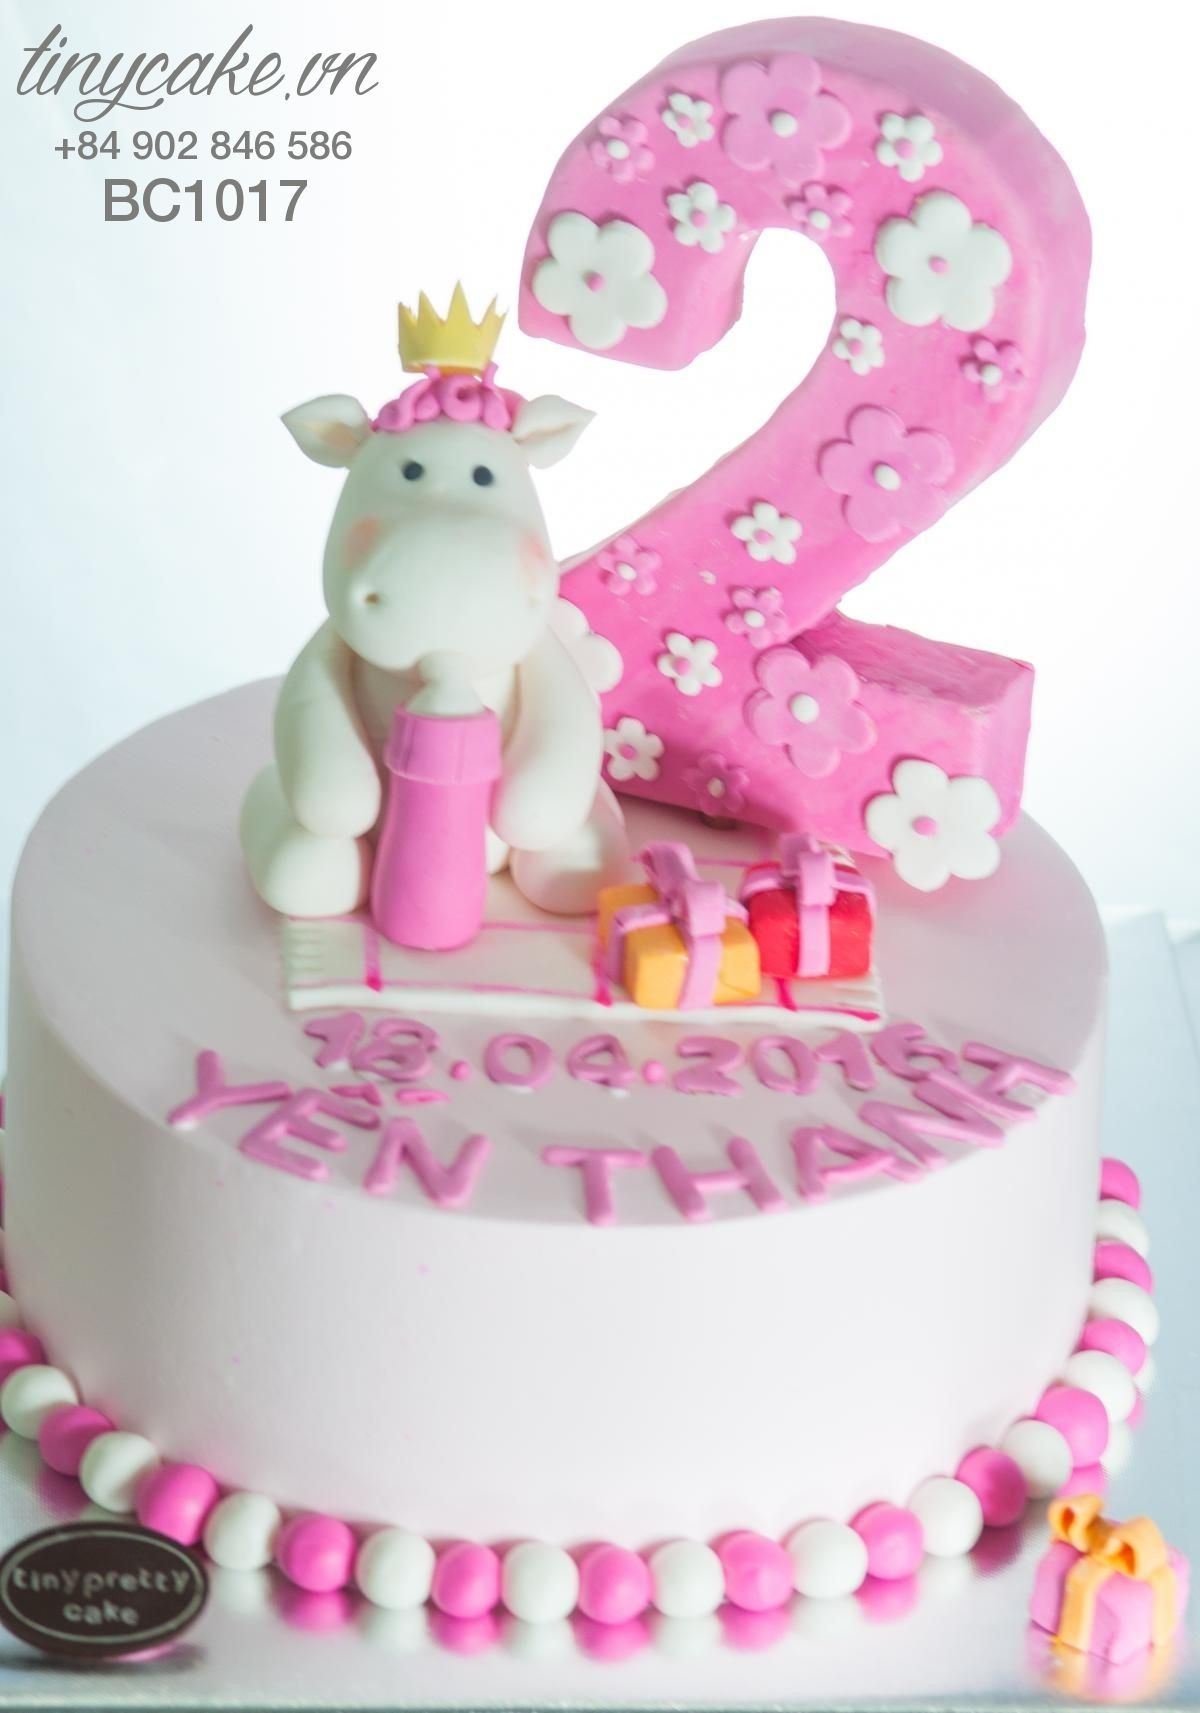 Cake Pictures For Birthday Girl
 Birthday cake with little horse for baby girl 2 years old